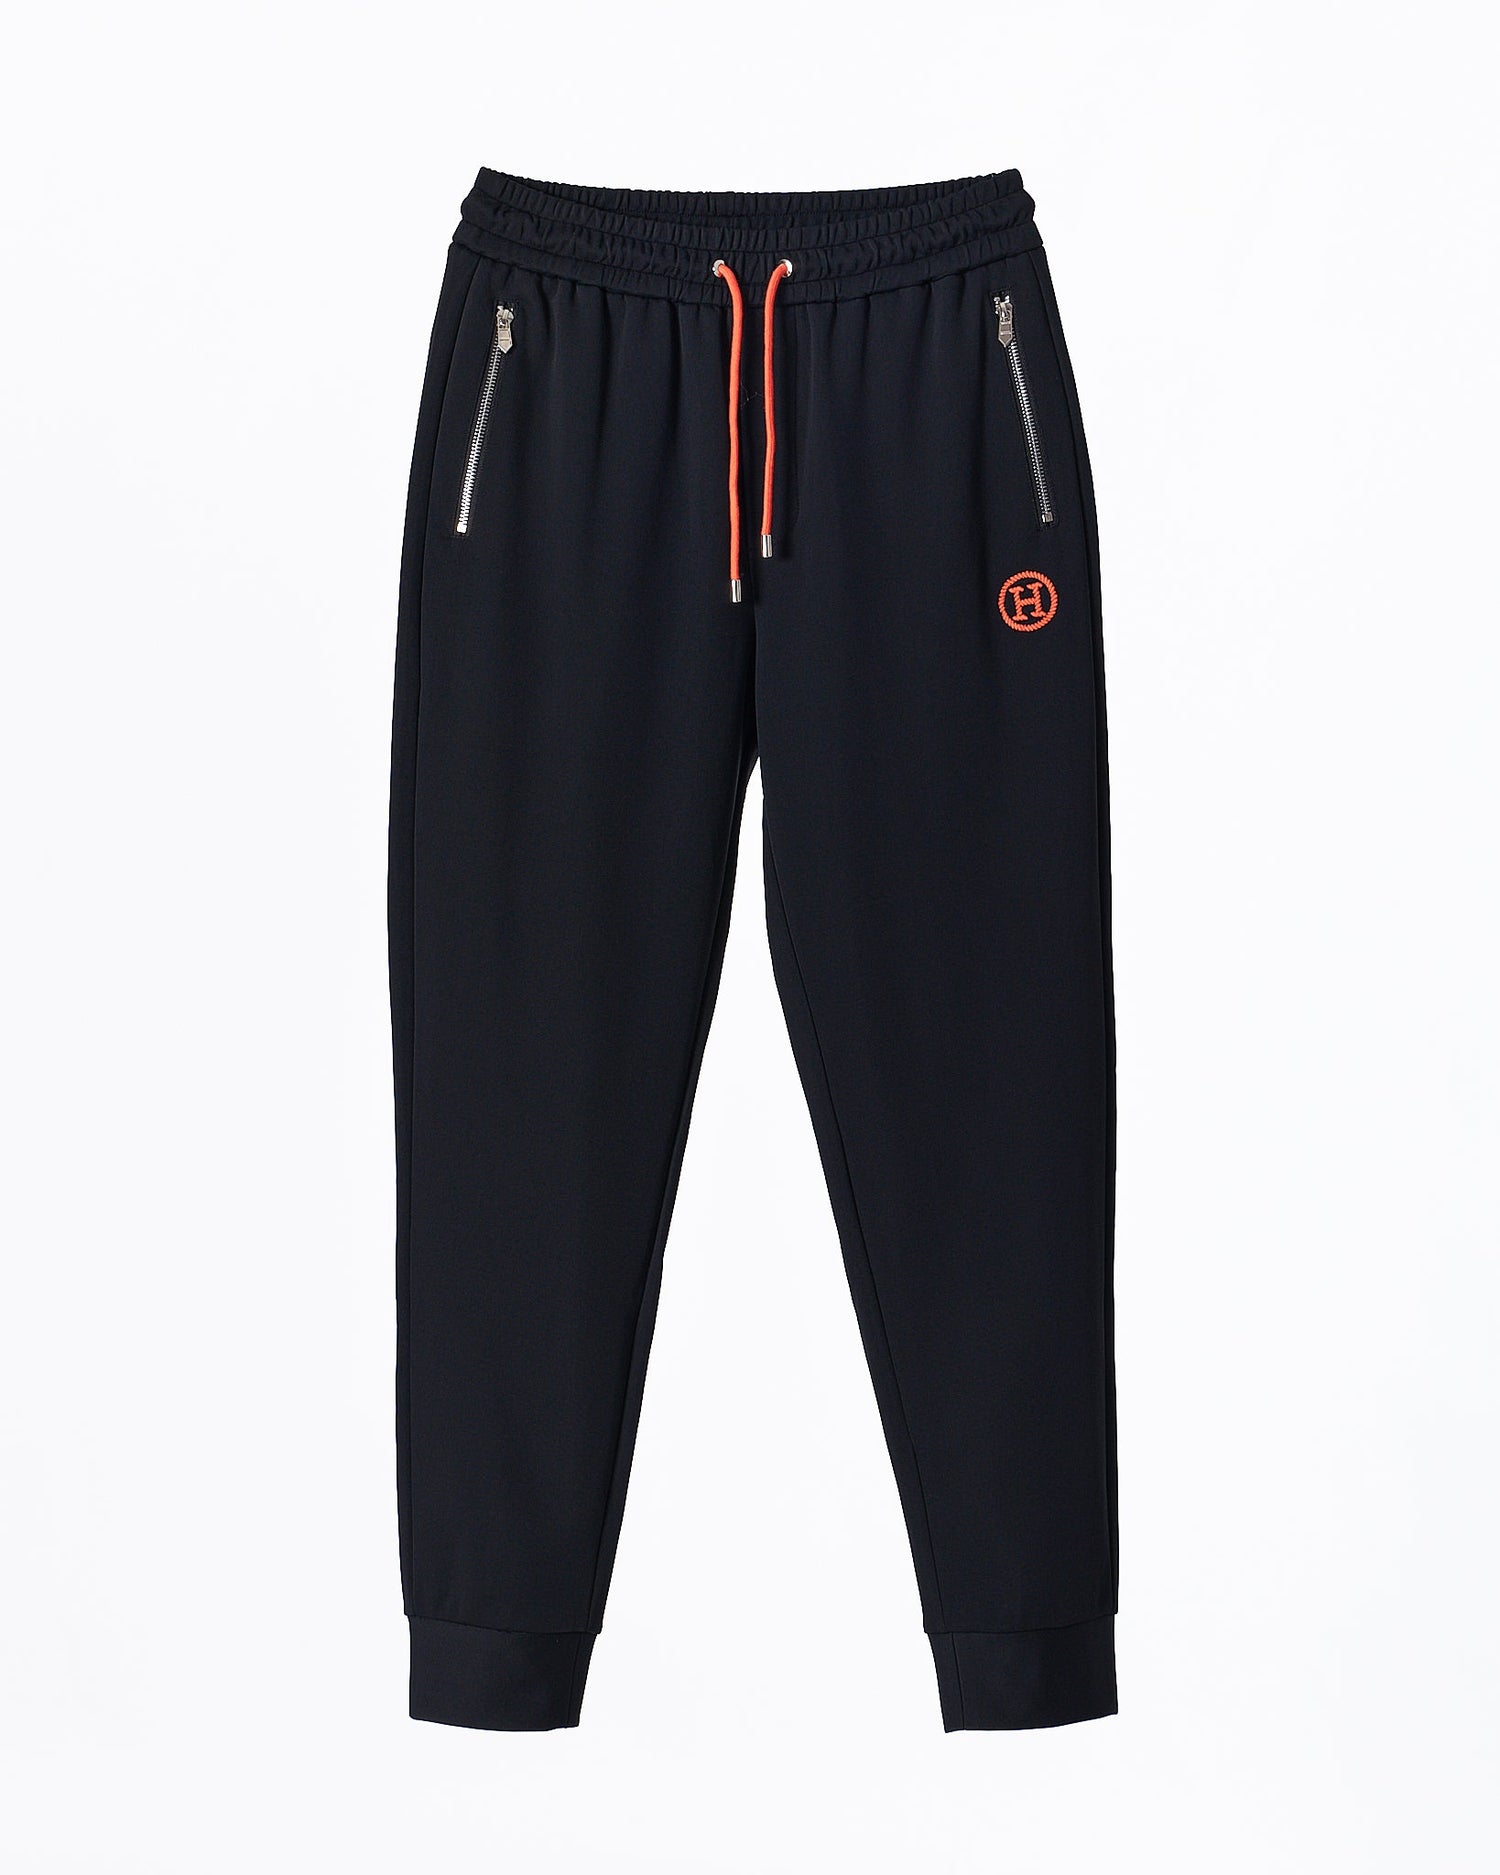 MOI OUTFIT-H Logo Embroidered Men Joggers 79.90